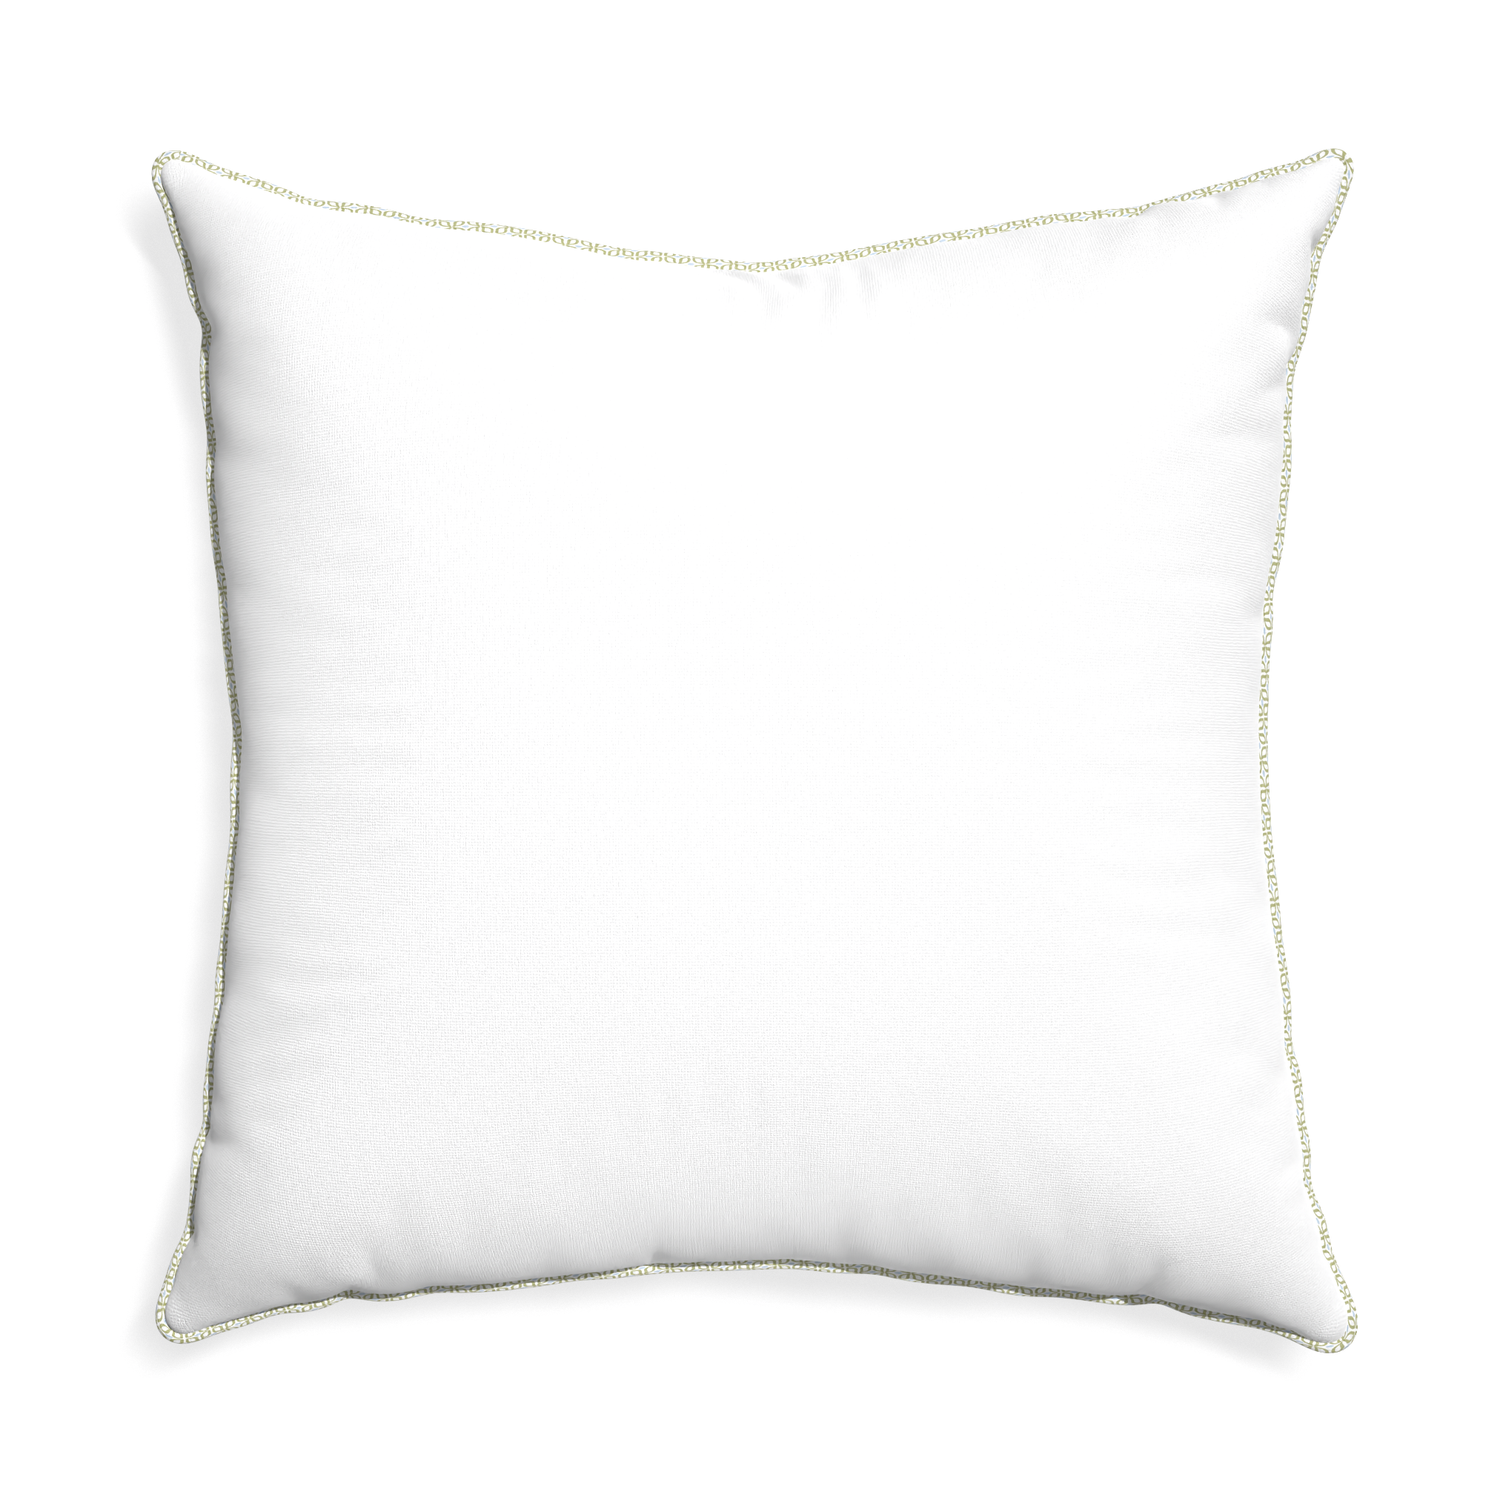 Euro-sham snow custom pillow with l piping on white background